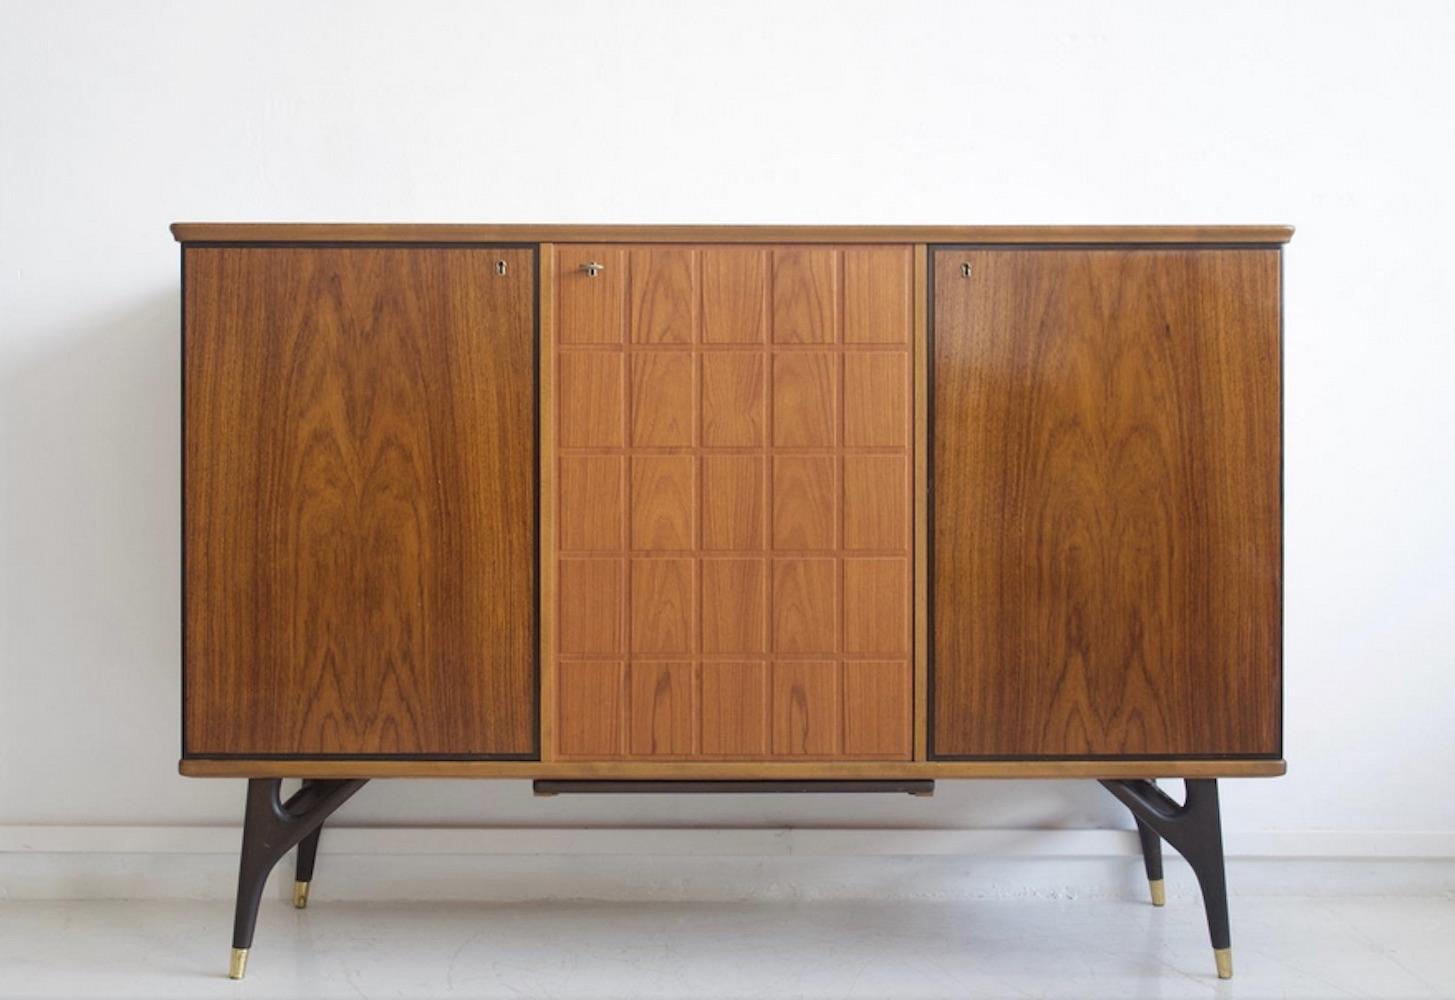 Sideboard veneered with partly stained beech and teak from circa 1950-1960. Manufactured by Tabergs Mobler. Legs with brass braces. Three doors, interior drawers and shelves. Key included. Good vintage condition, minor marks as seen on photos.